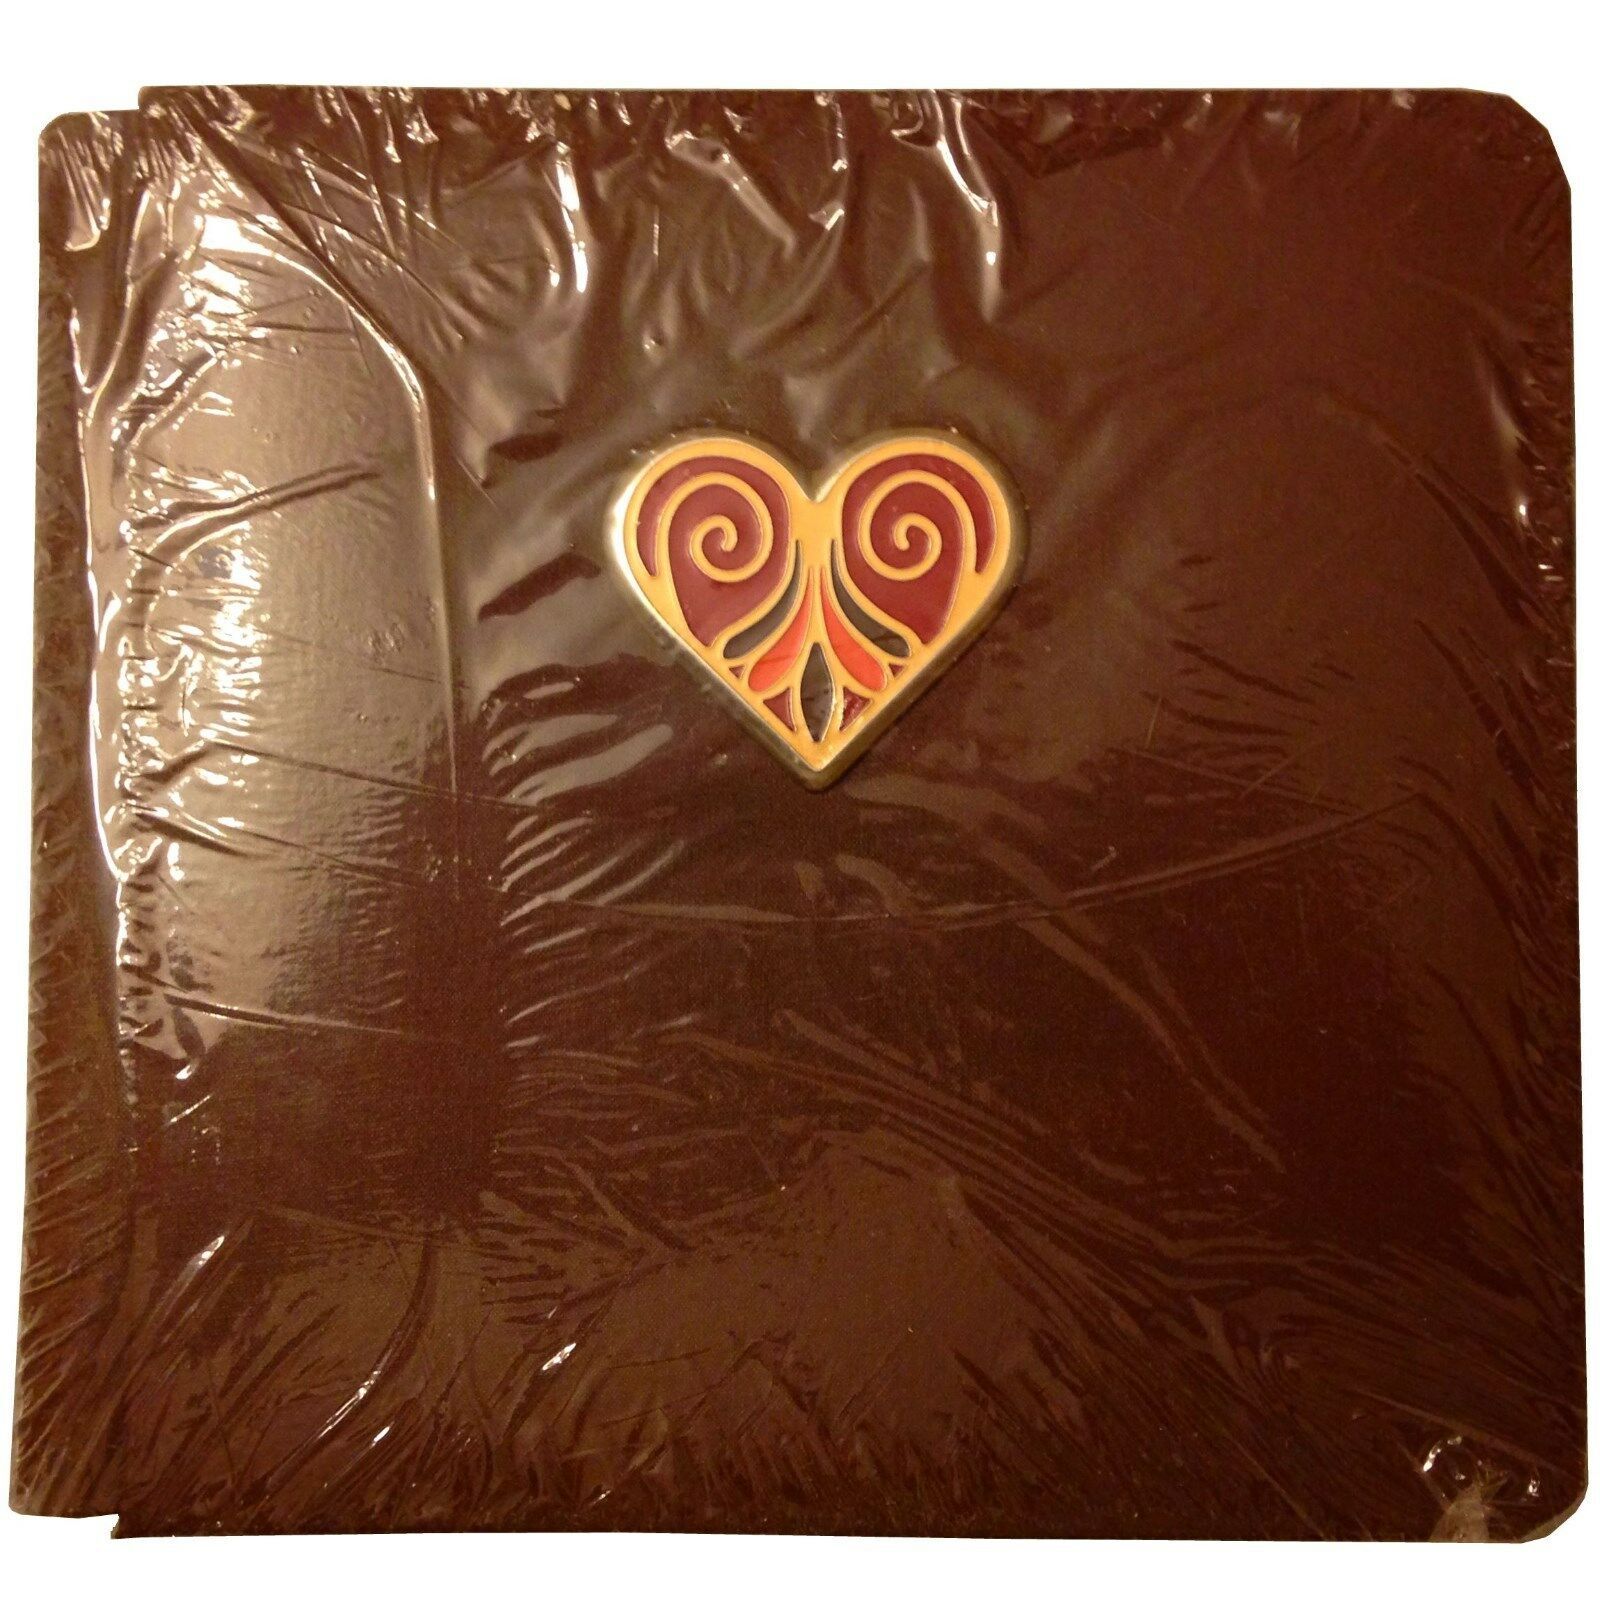 Primary image for Creative Memories 7x7 Album, Brown, Heart Medallion, NEW NIP; 24 pages